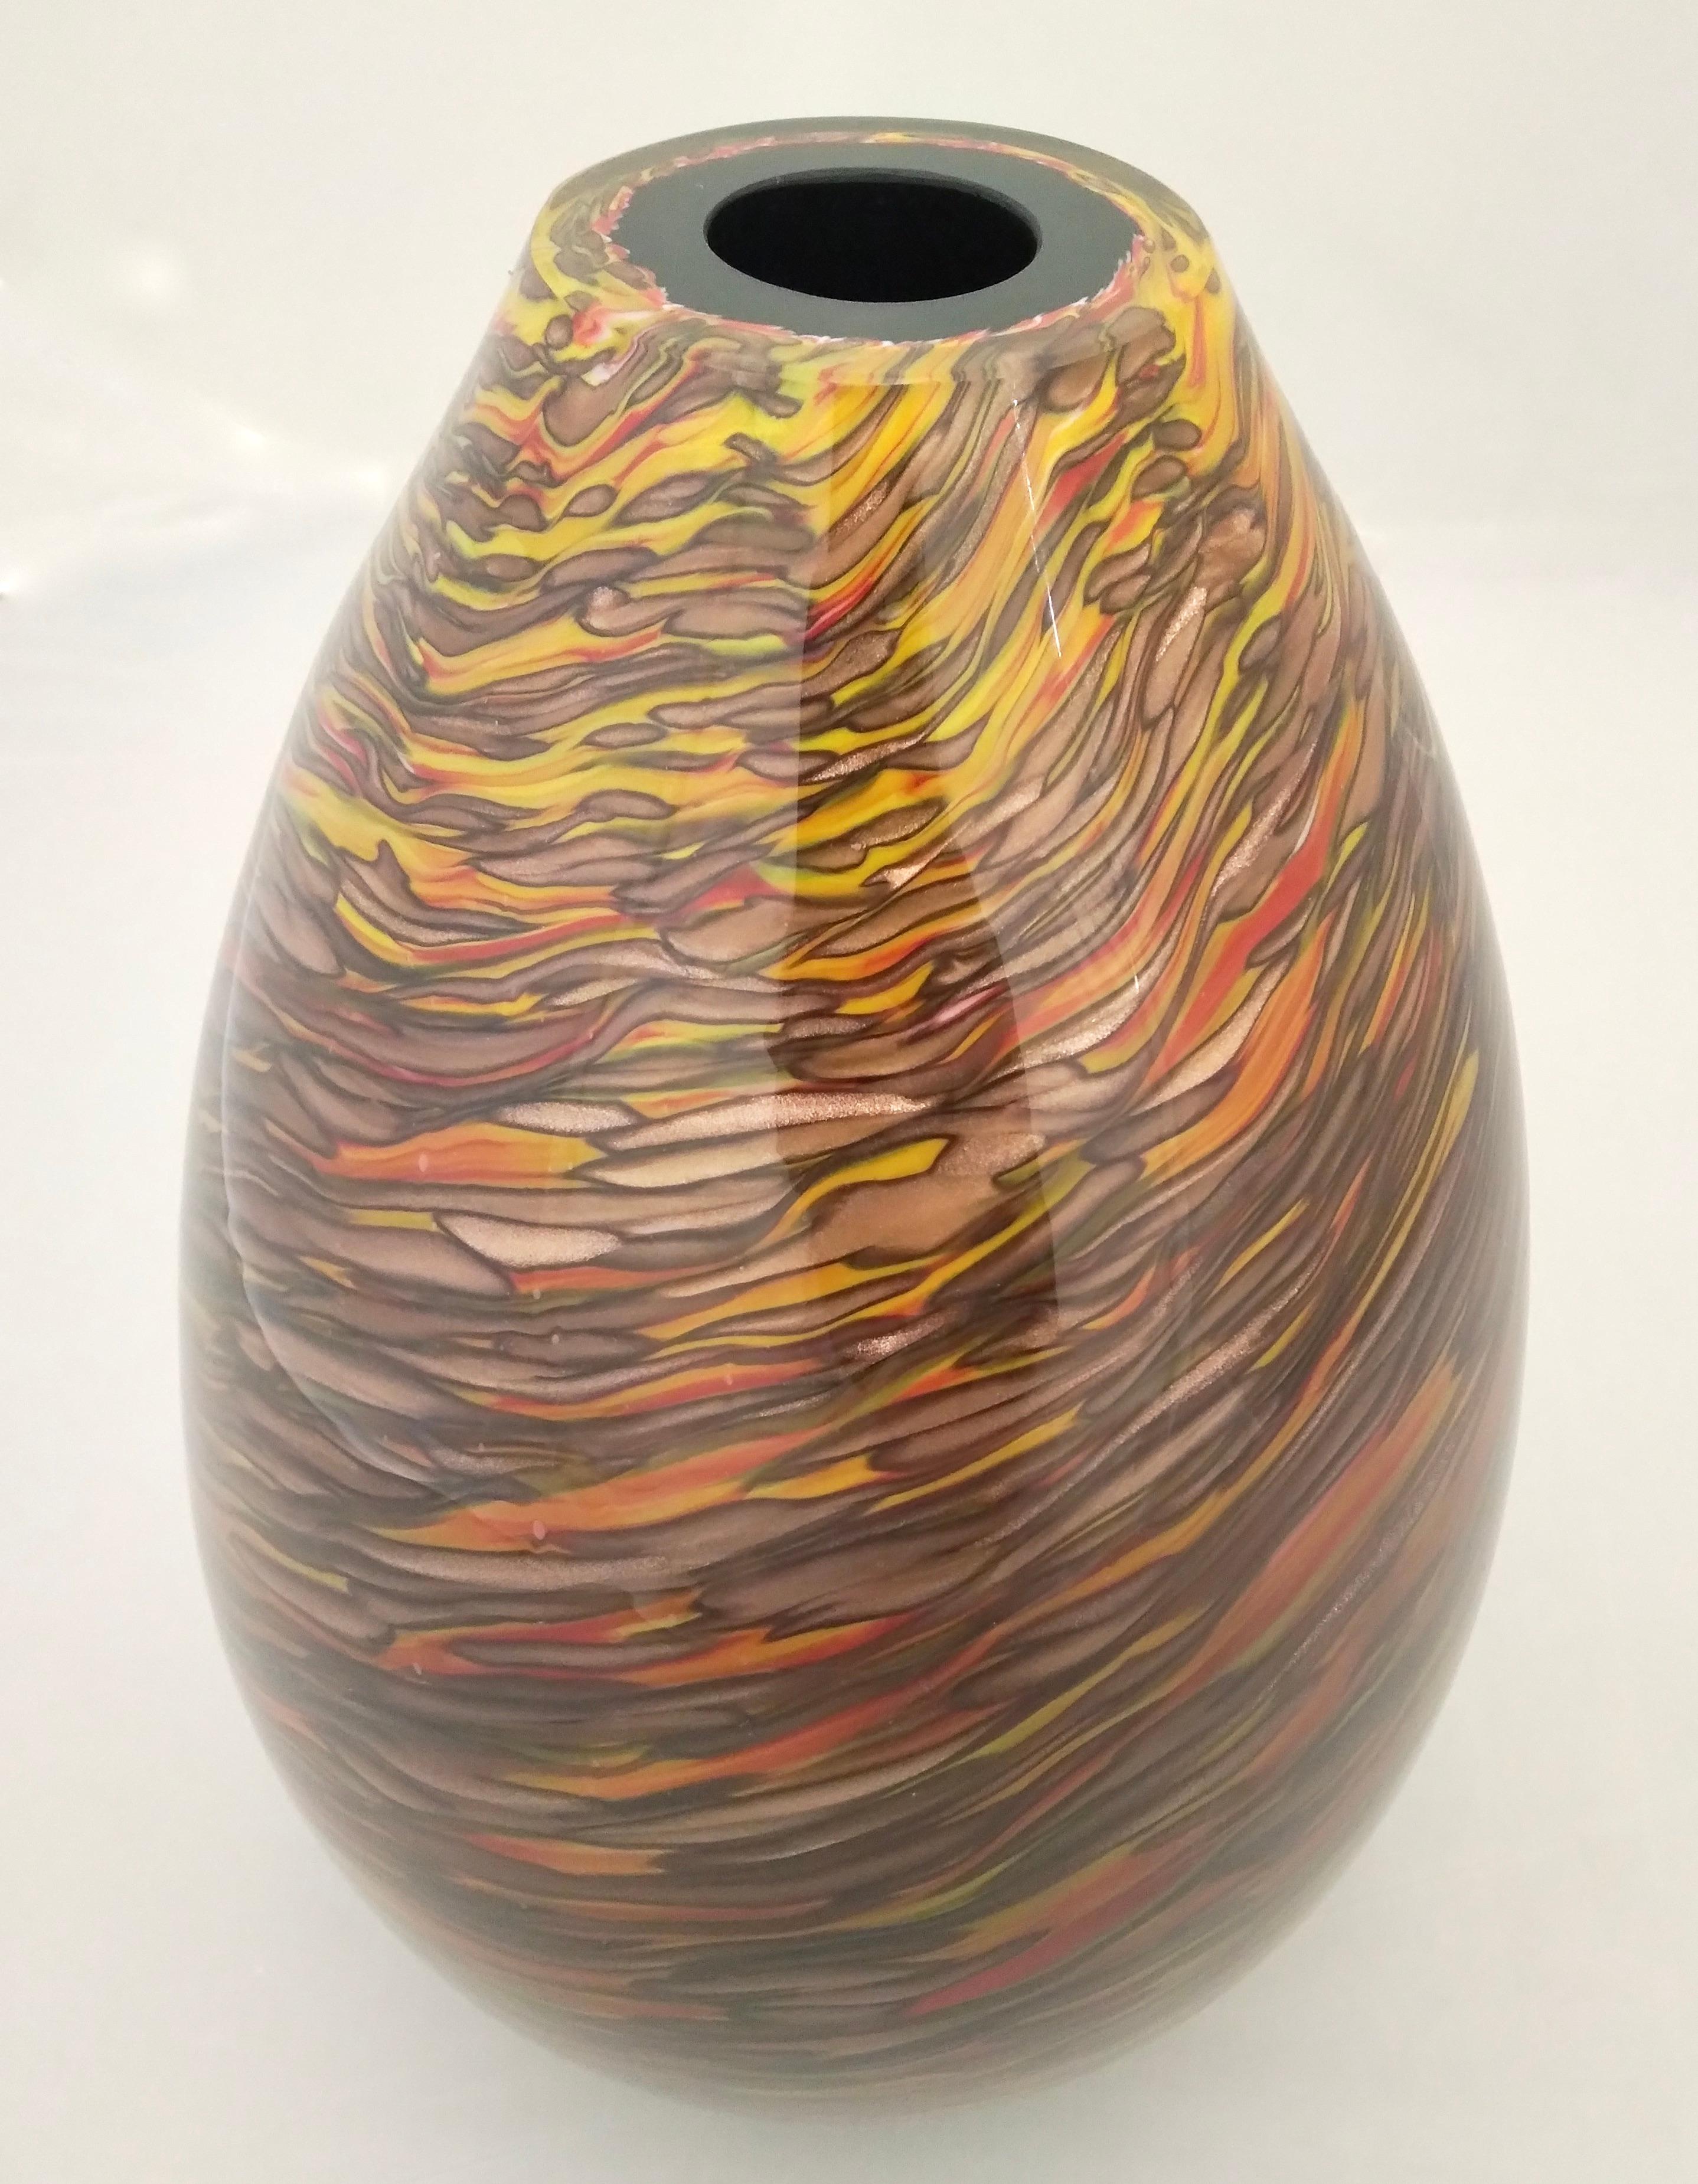 Formia 1980s Modern Ovoid Brown Yellow Red Orange Gold Murano Glass Vase For Sale 6